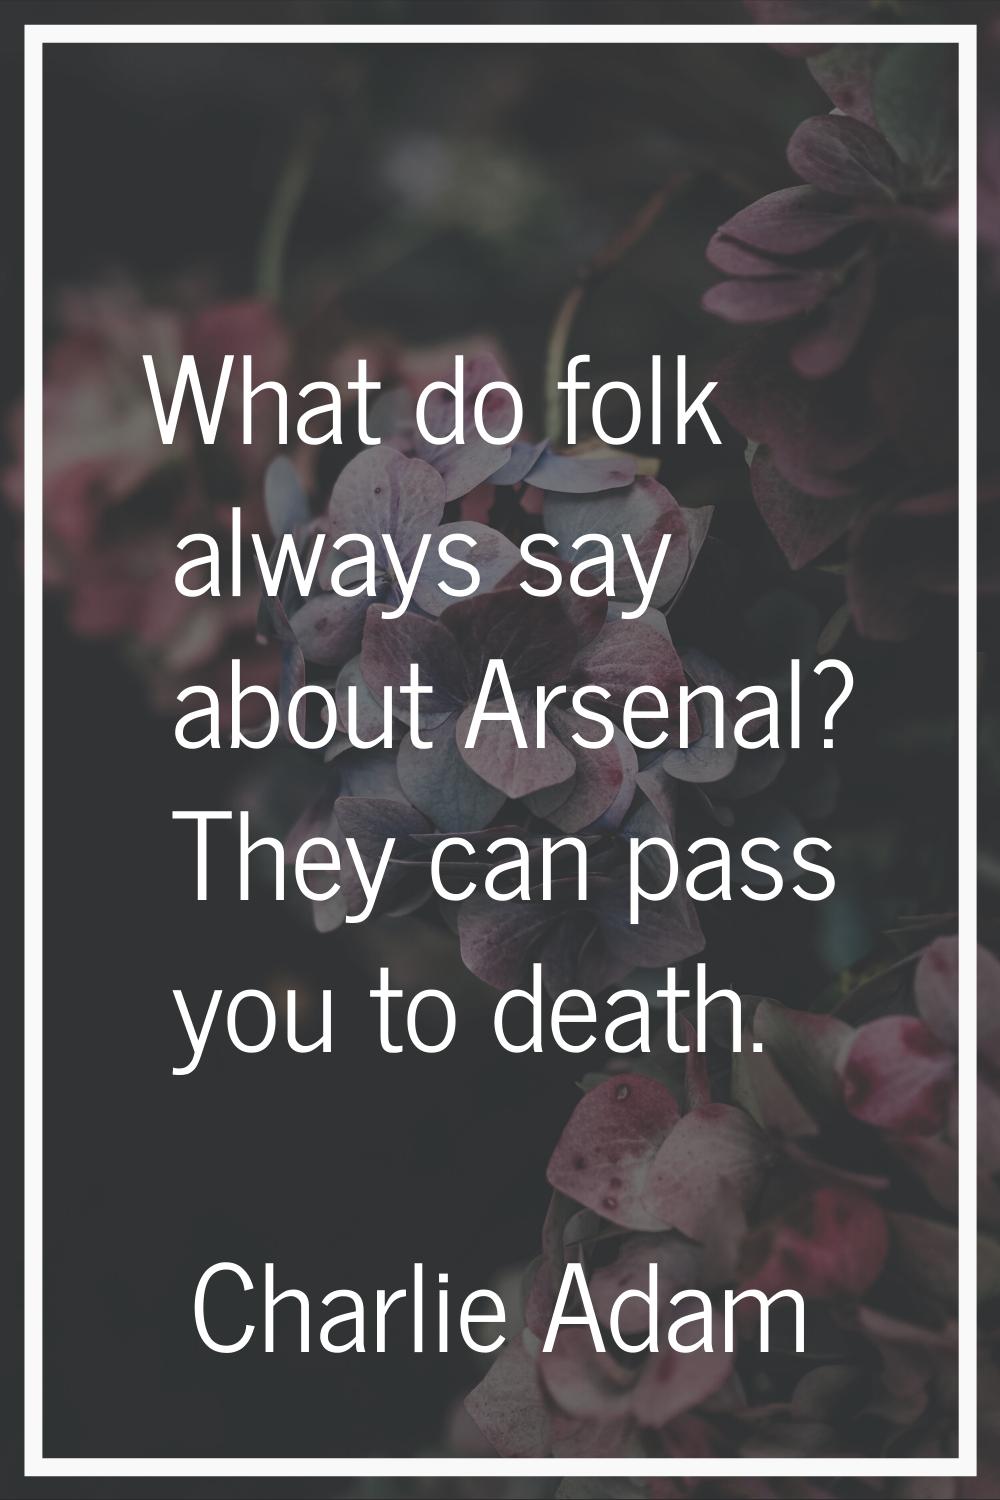 What do folk always say about Arsenal? They can pass you to death.